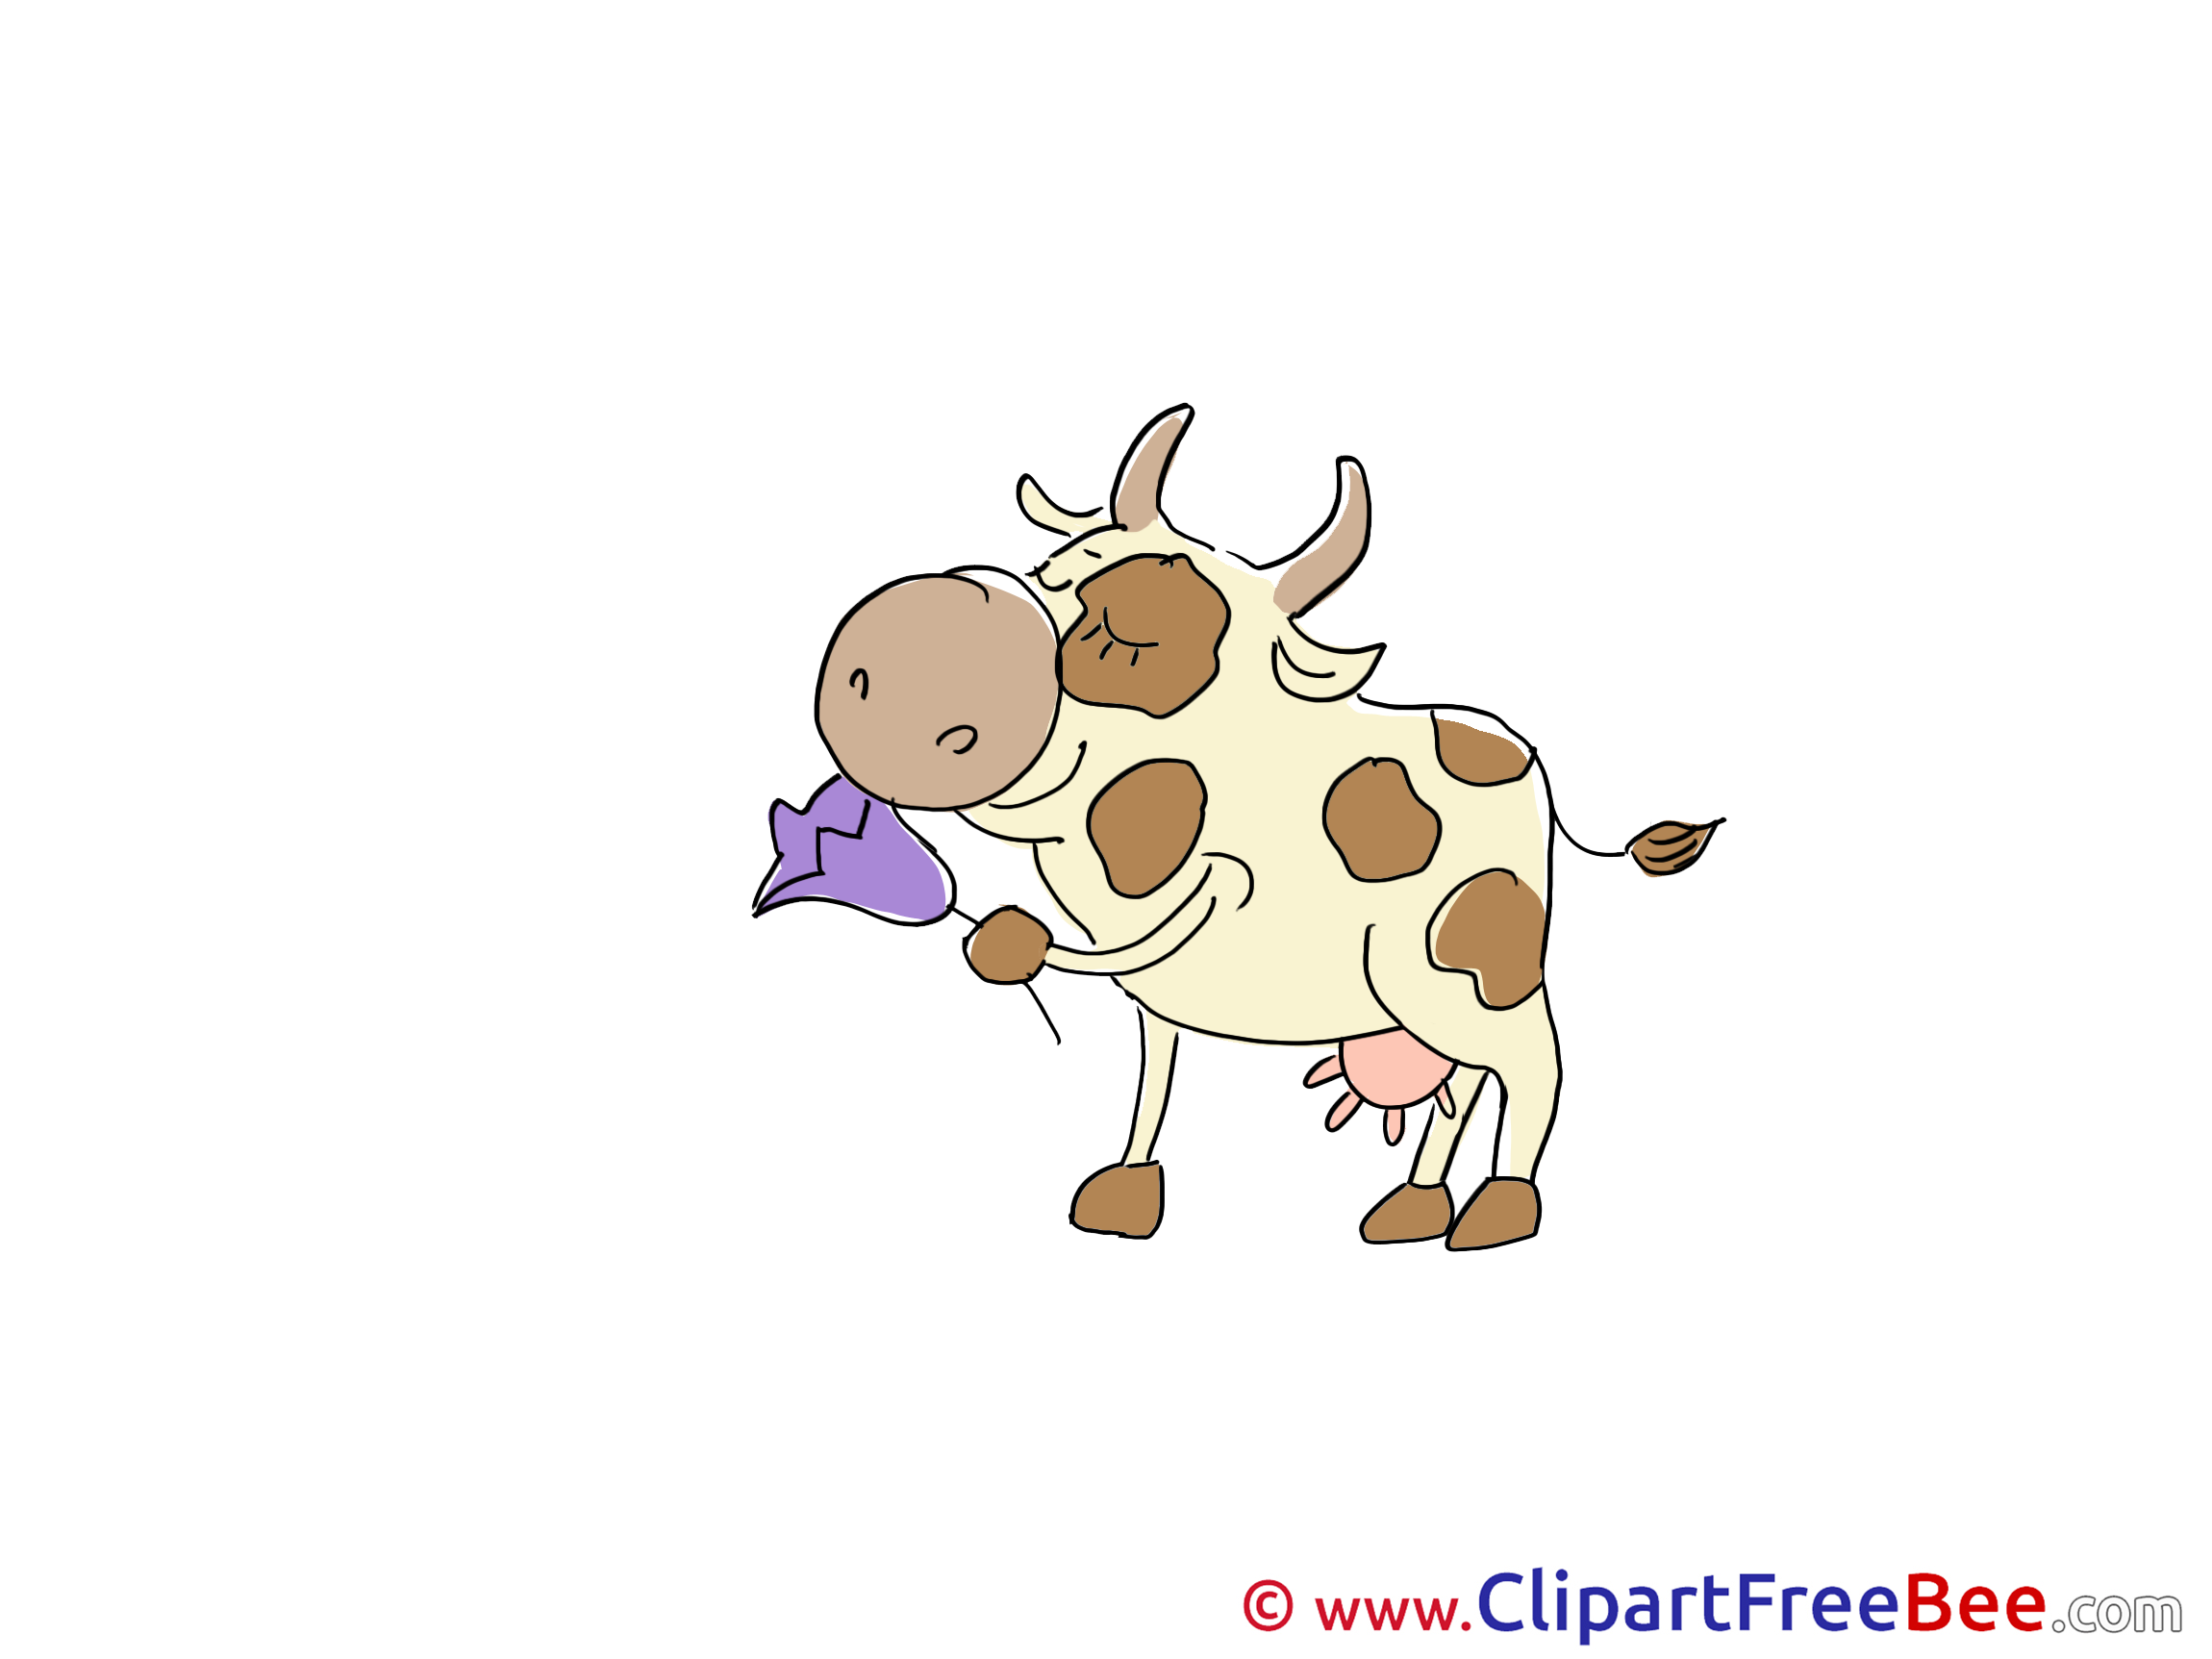 Flower Cow free Cliparts for download